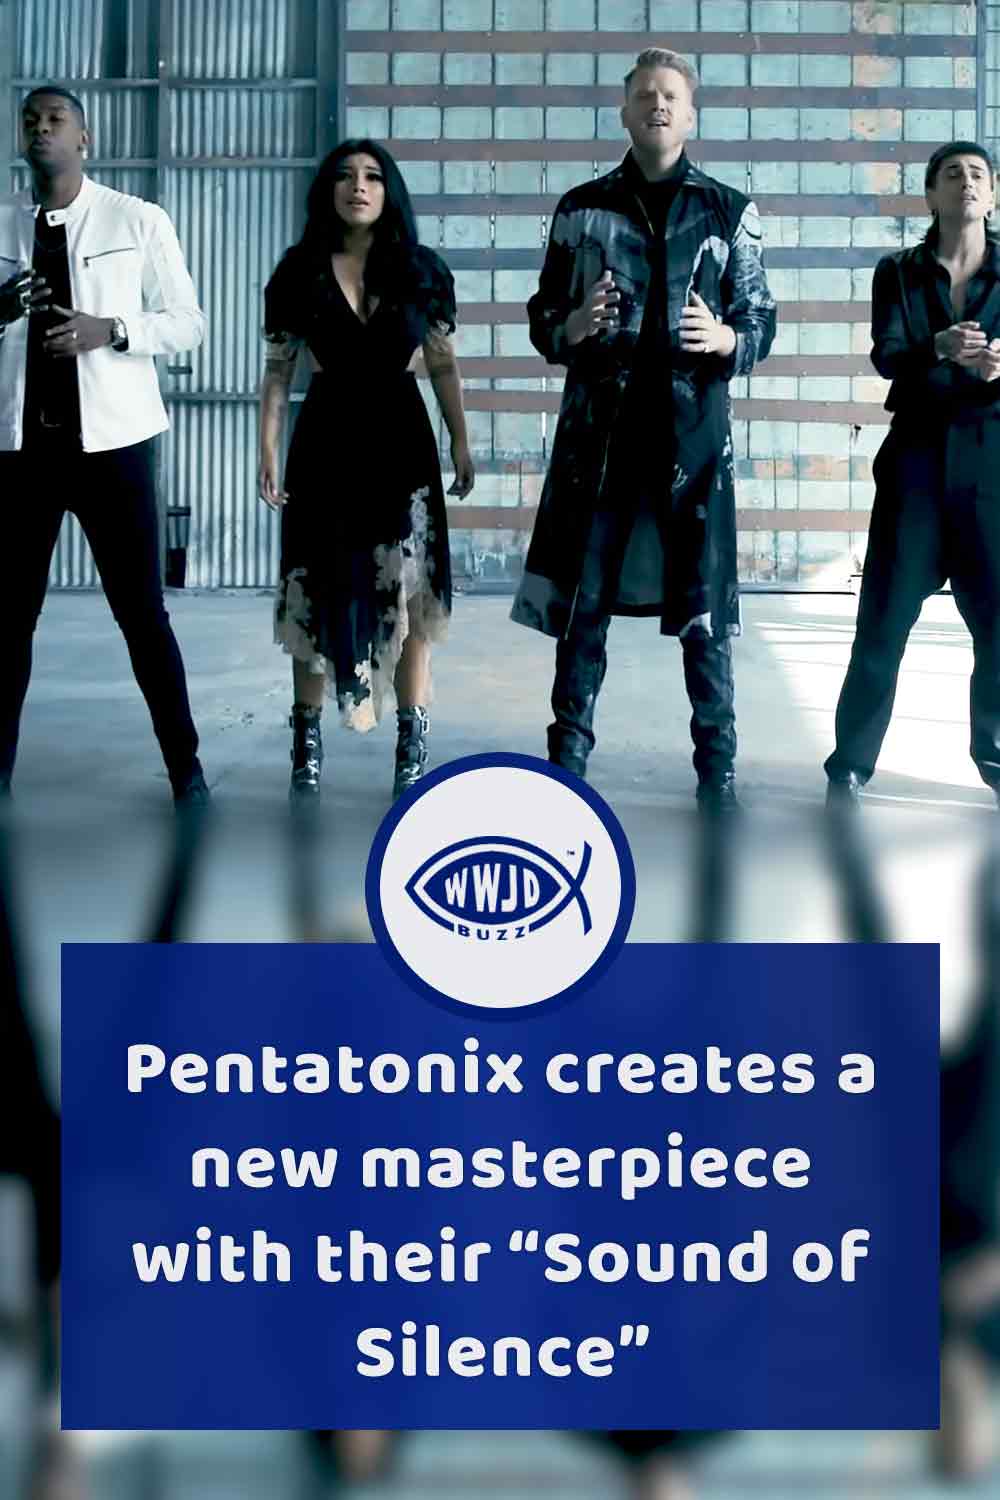 Pentatonix creates a new masterpiece with their “Sound of Silence”